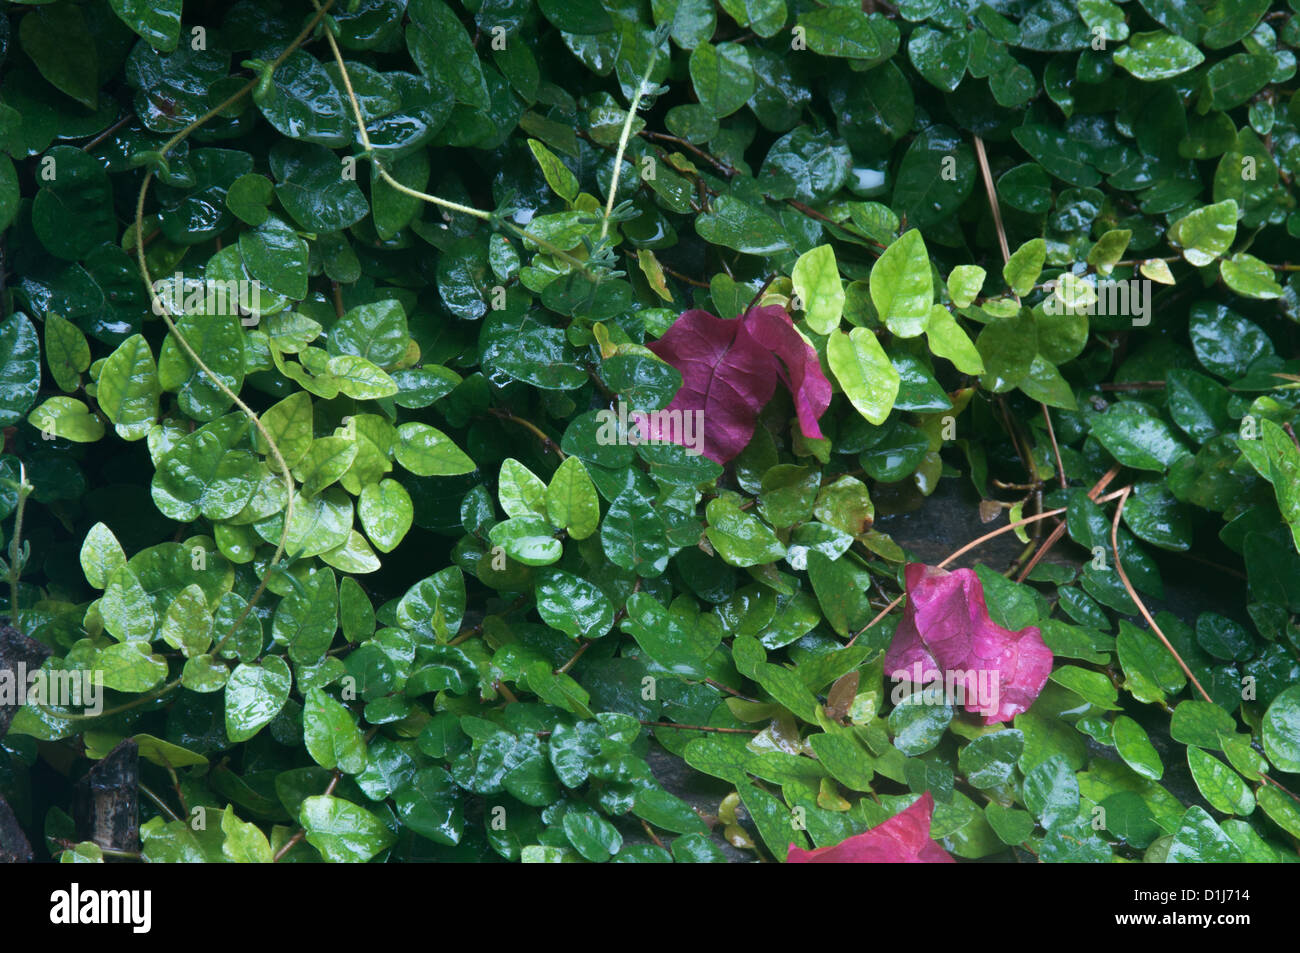 Small green leaves in a pond with purple petals Stock Photo